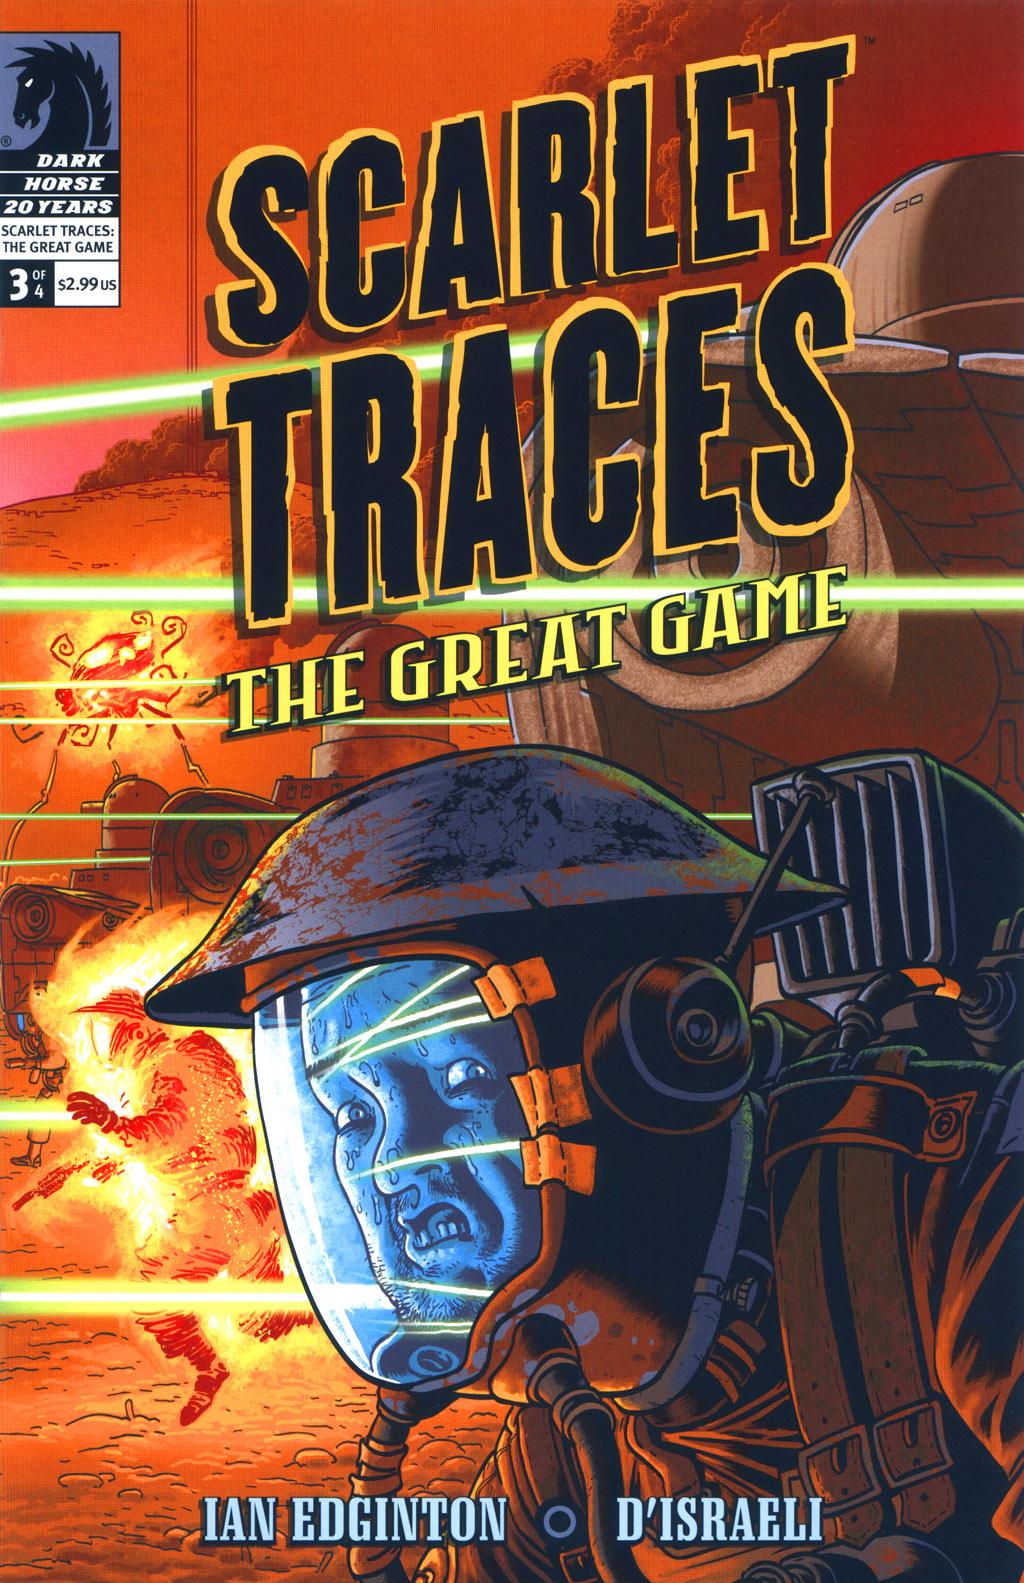 Scarlet Traces: The Great Game Vol. 1 #3